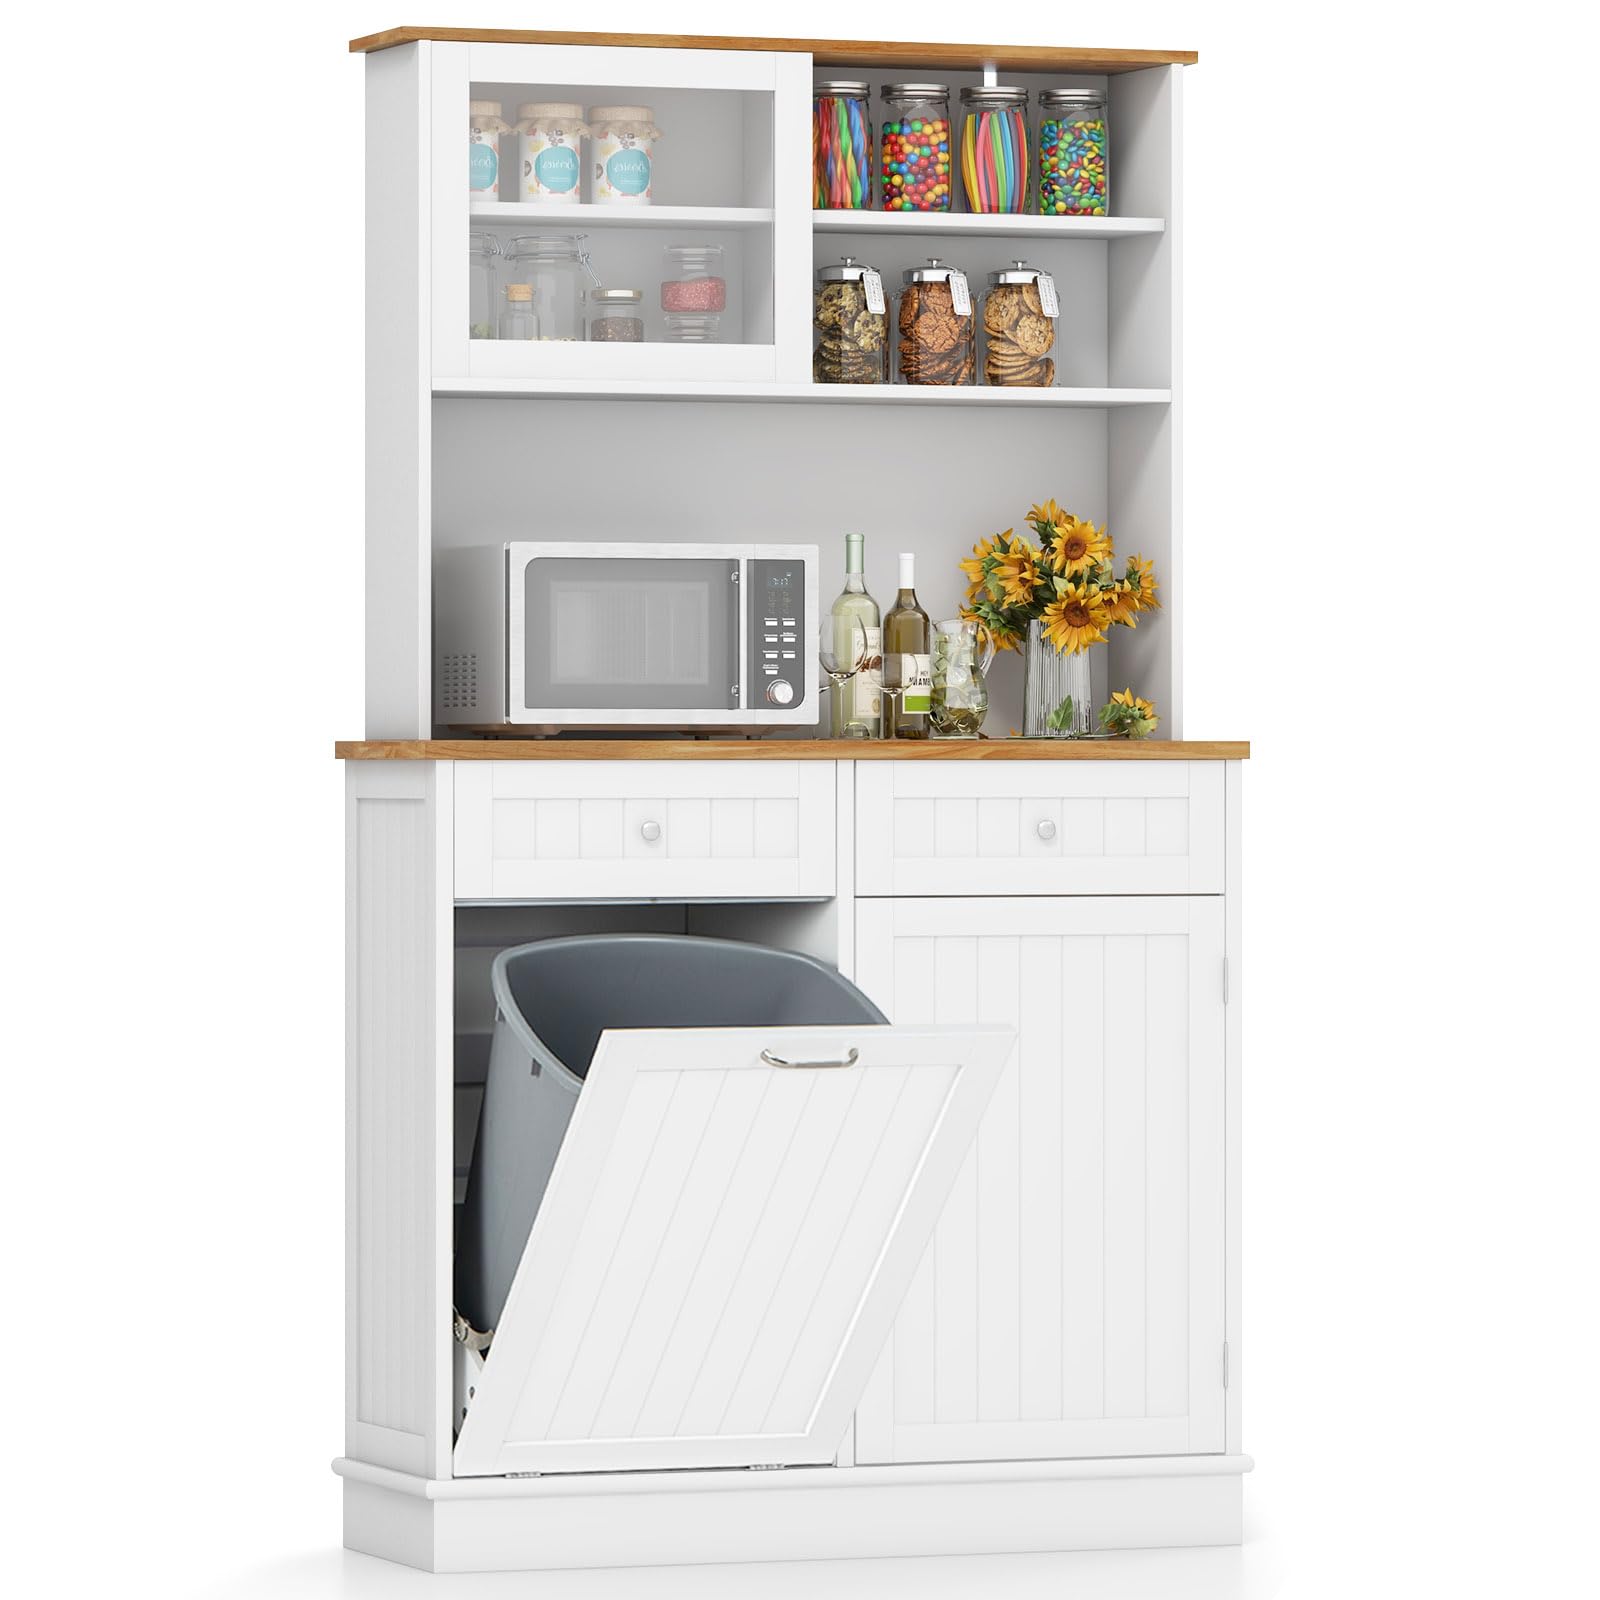 Giantex 68” Tall Kitchen Pantry, Buffet Hutch w/Tilt Out Trash Can Storage Cabinet, 2 Drawer, Shelves